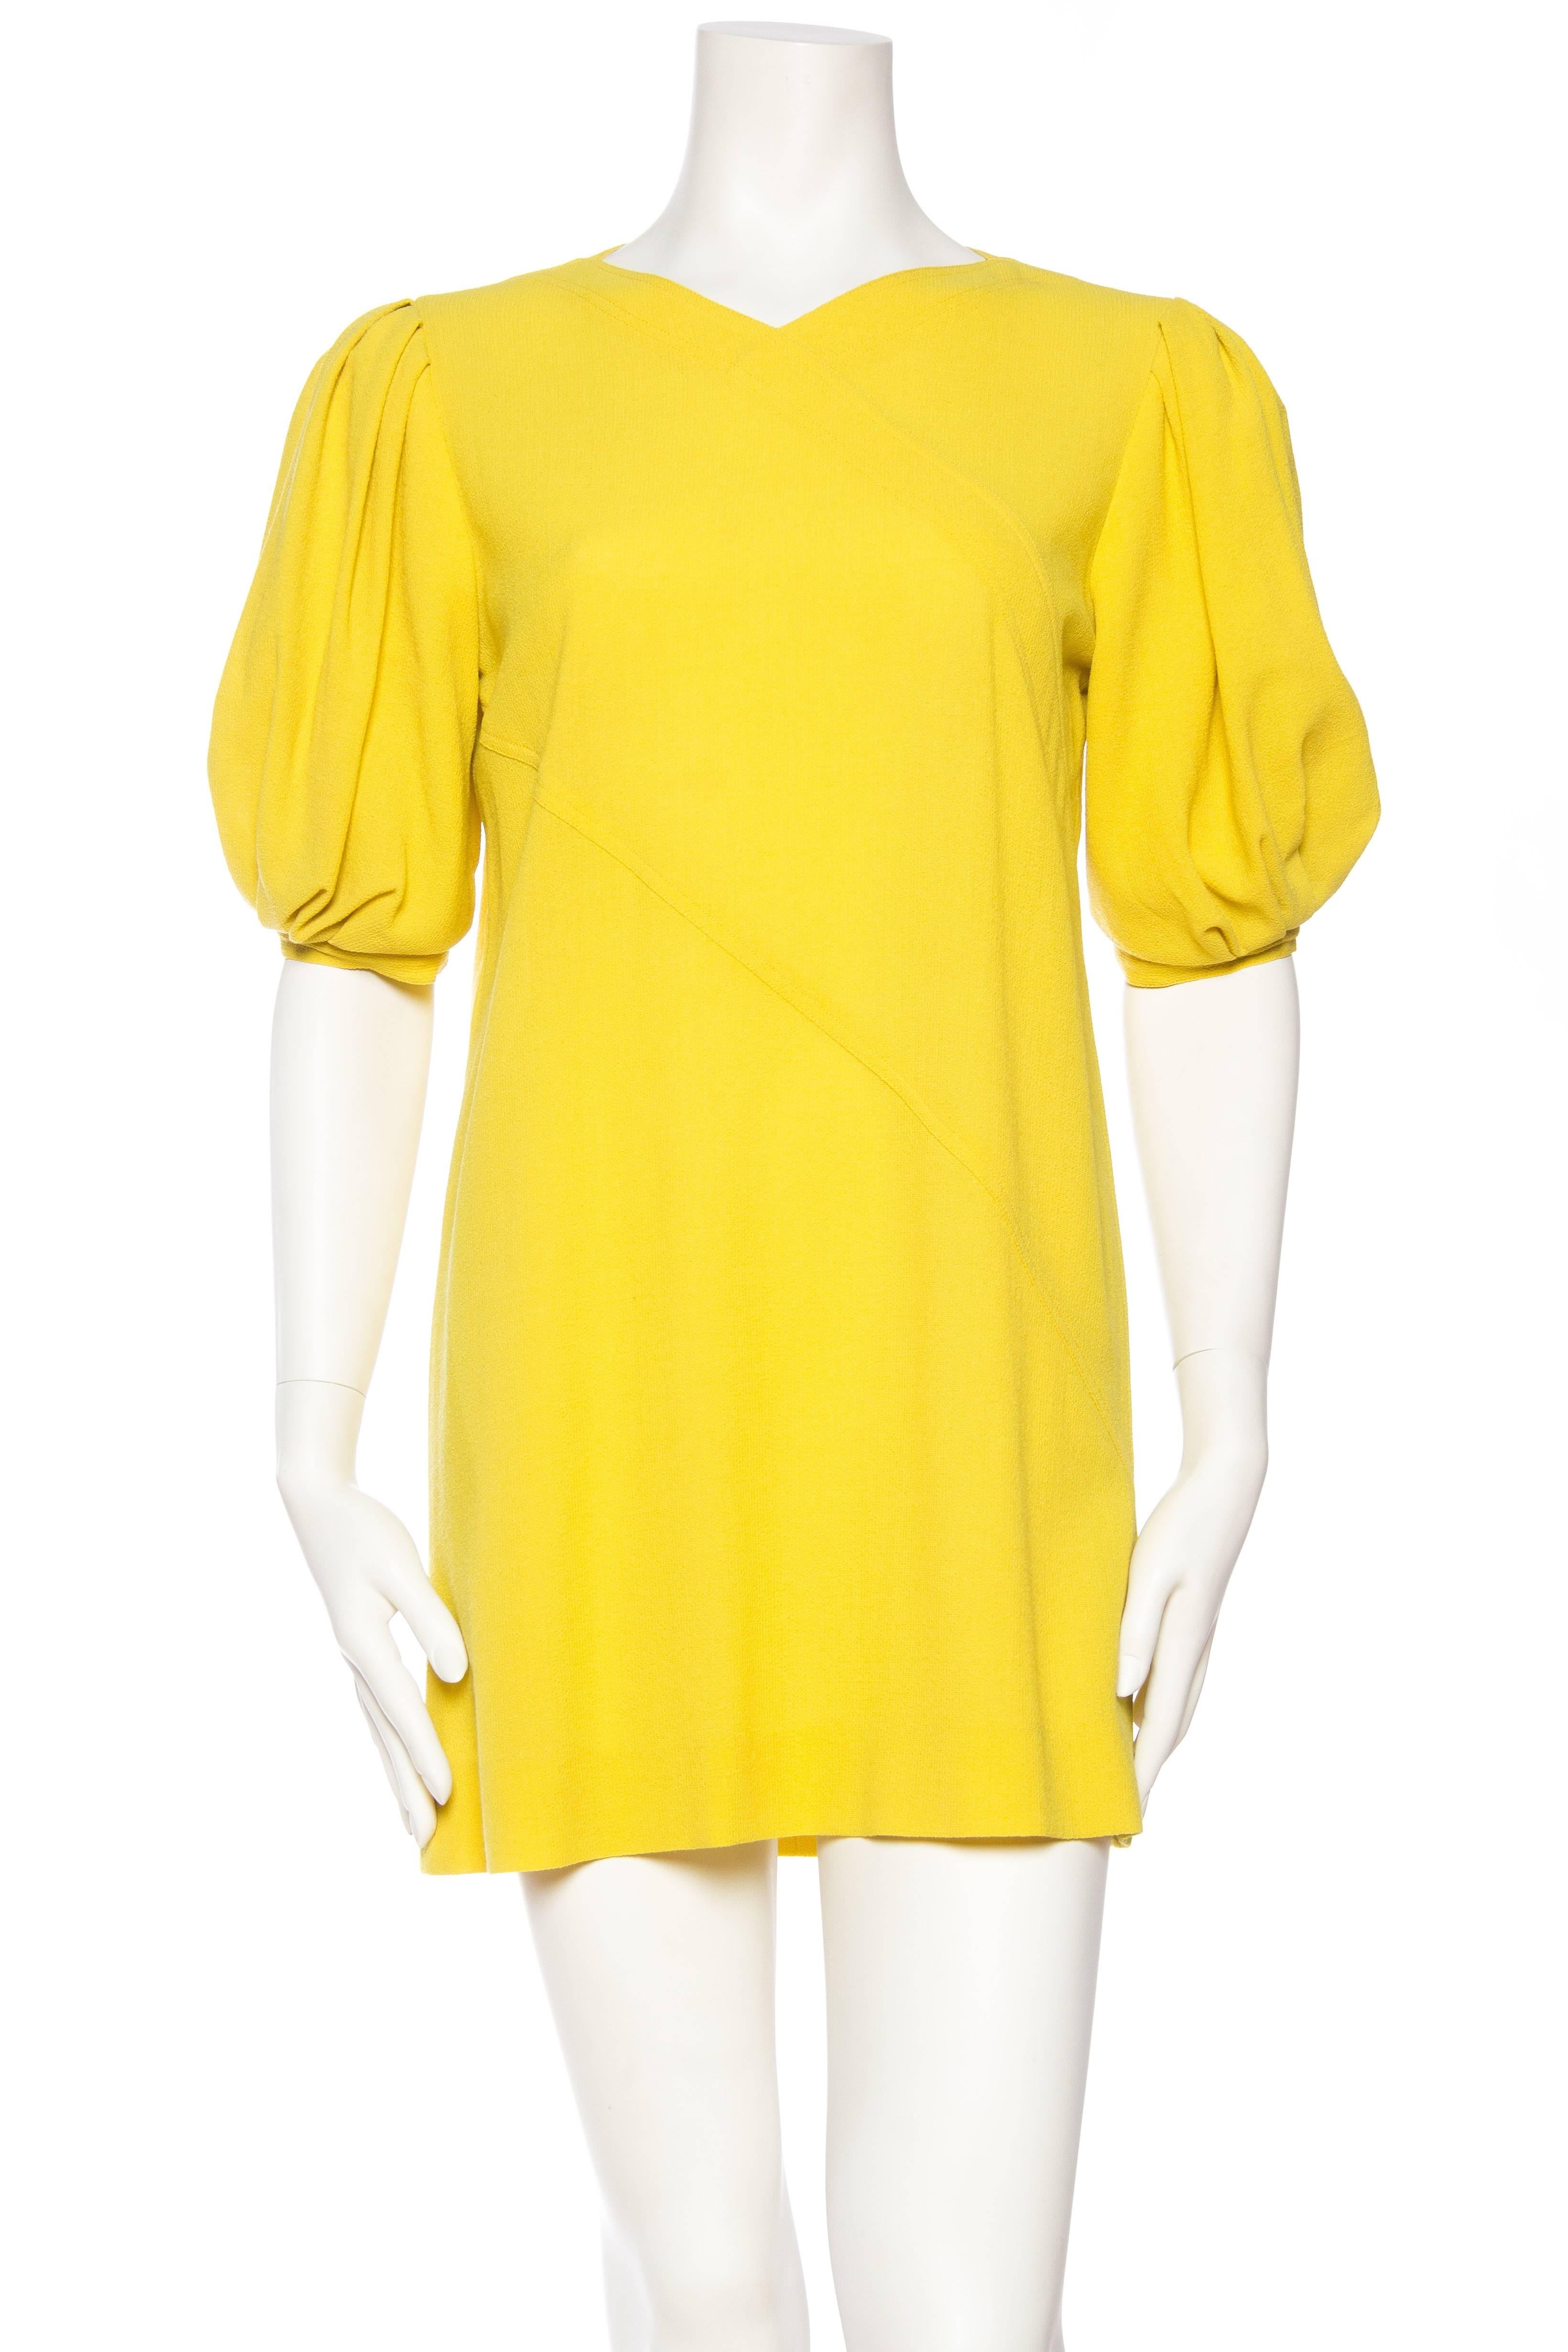 Jean Muir Lightweight Mod Yellow Dress In Excellent Condition In New York, NY